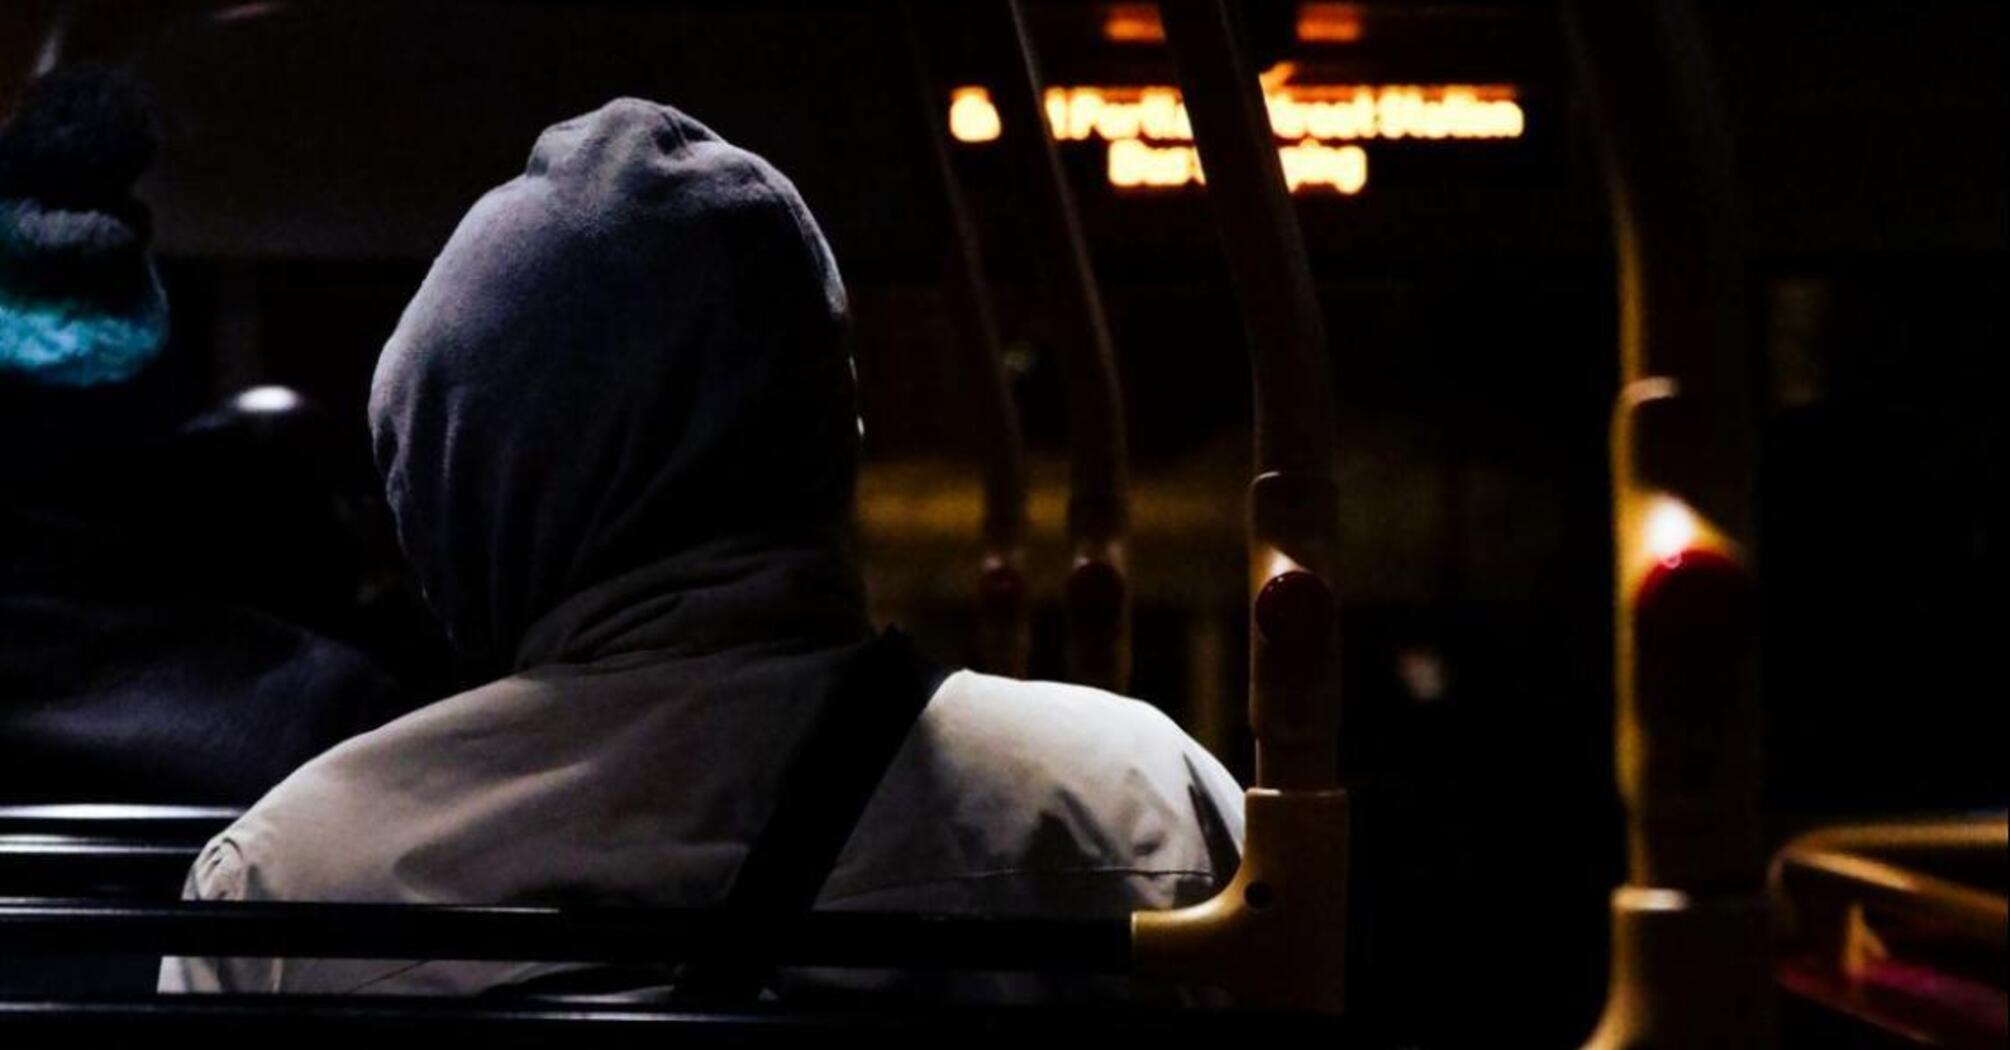 A passenger in a hoodie sits on a dimly lit bus at night